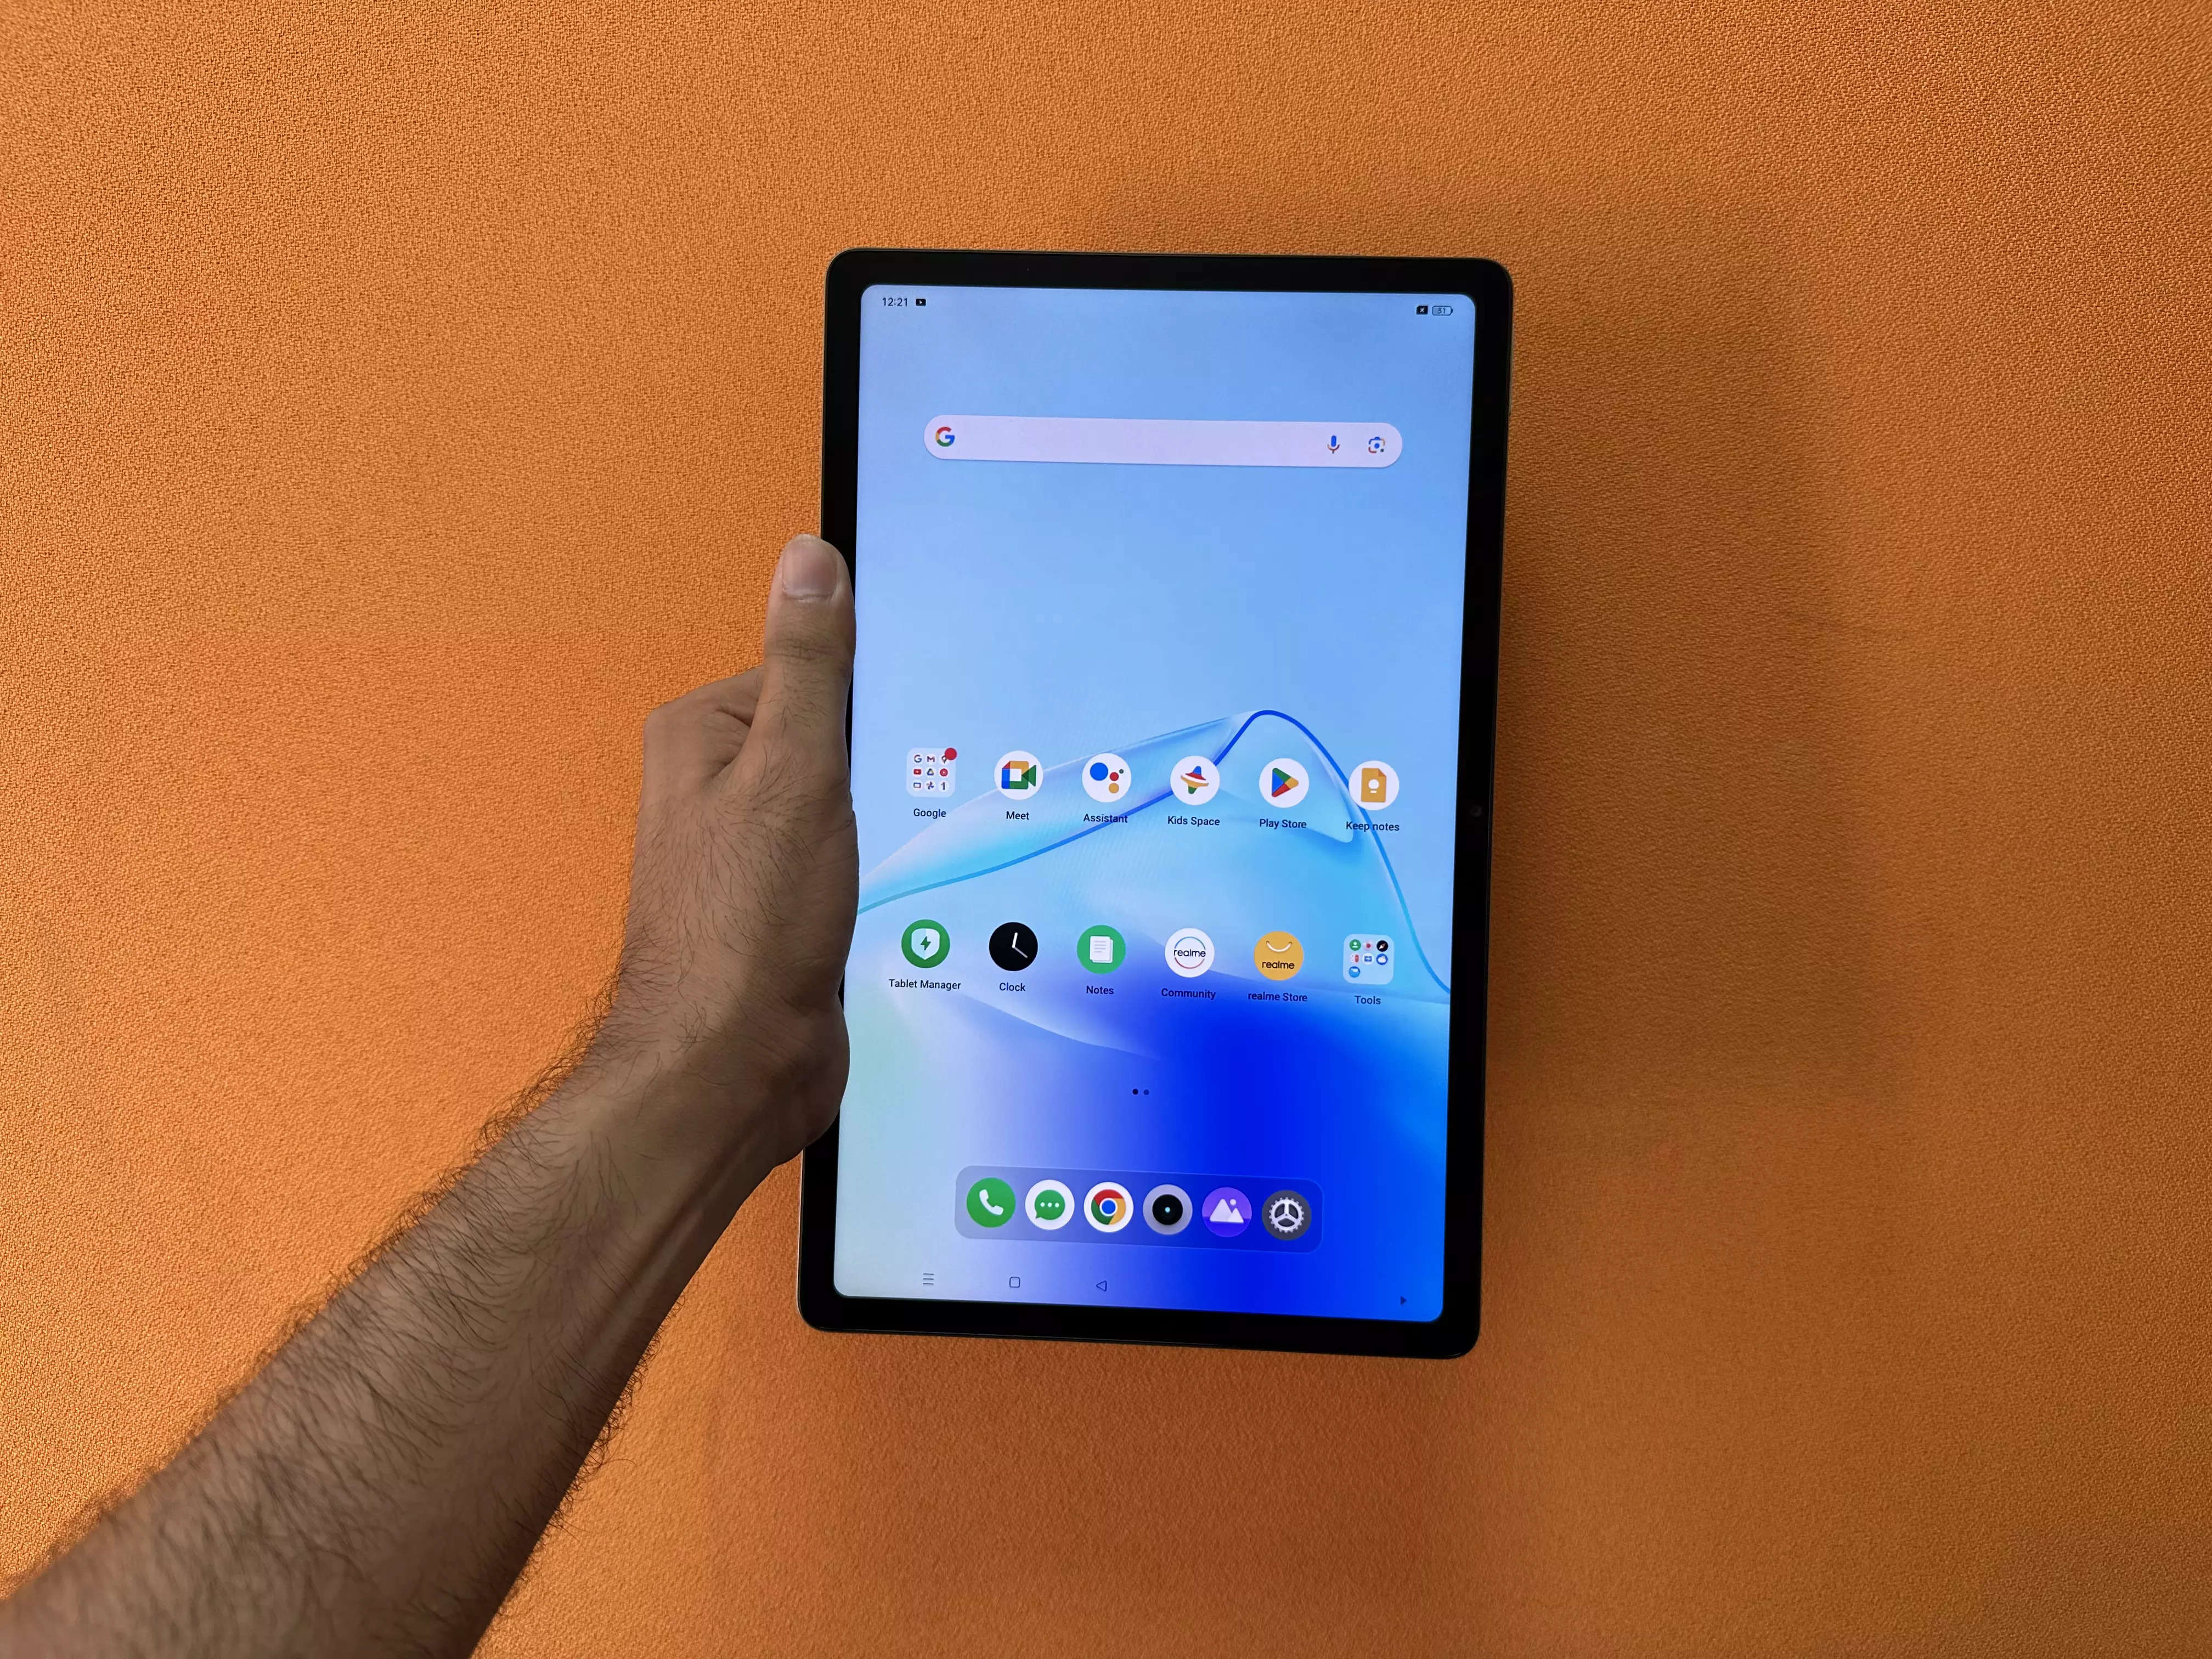 https://www.businessinsider.in/photo/102087248/realme-pad-2-review-a-budget-tablet-for-the-masses.jpg